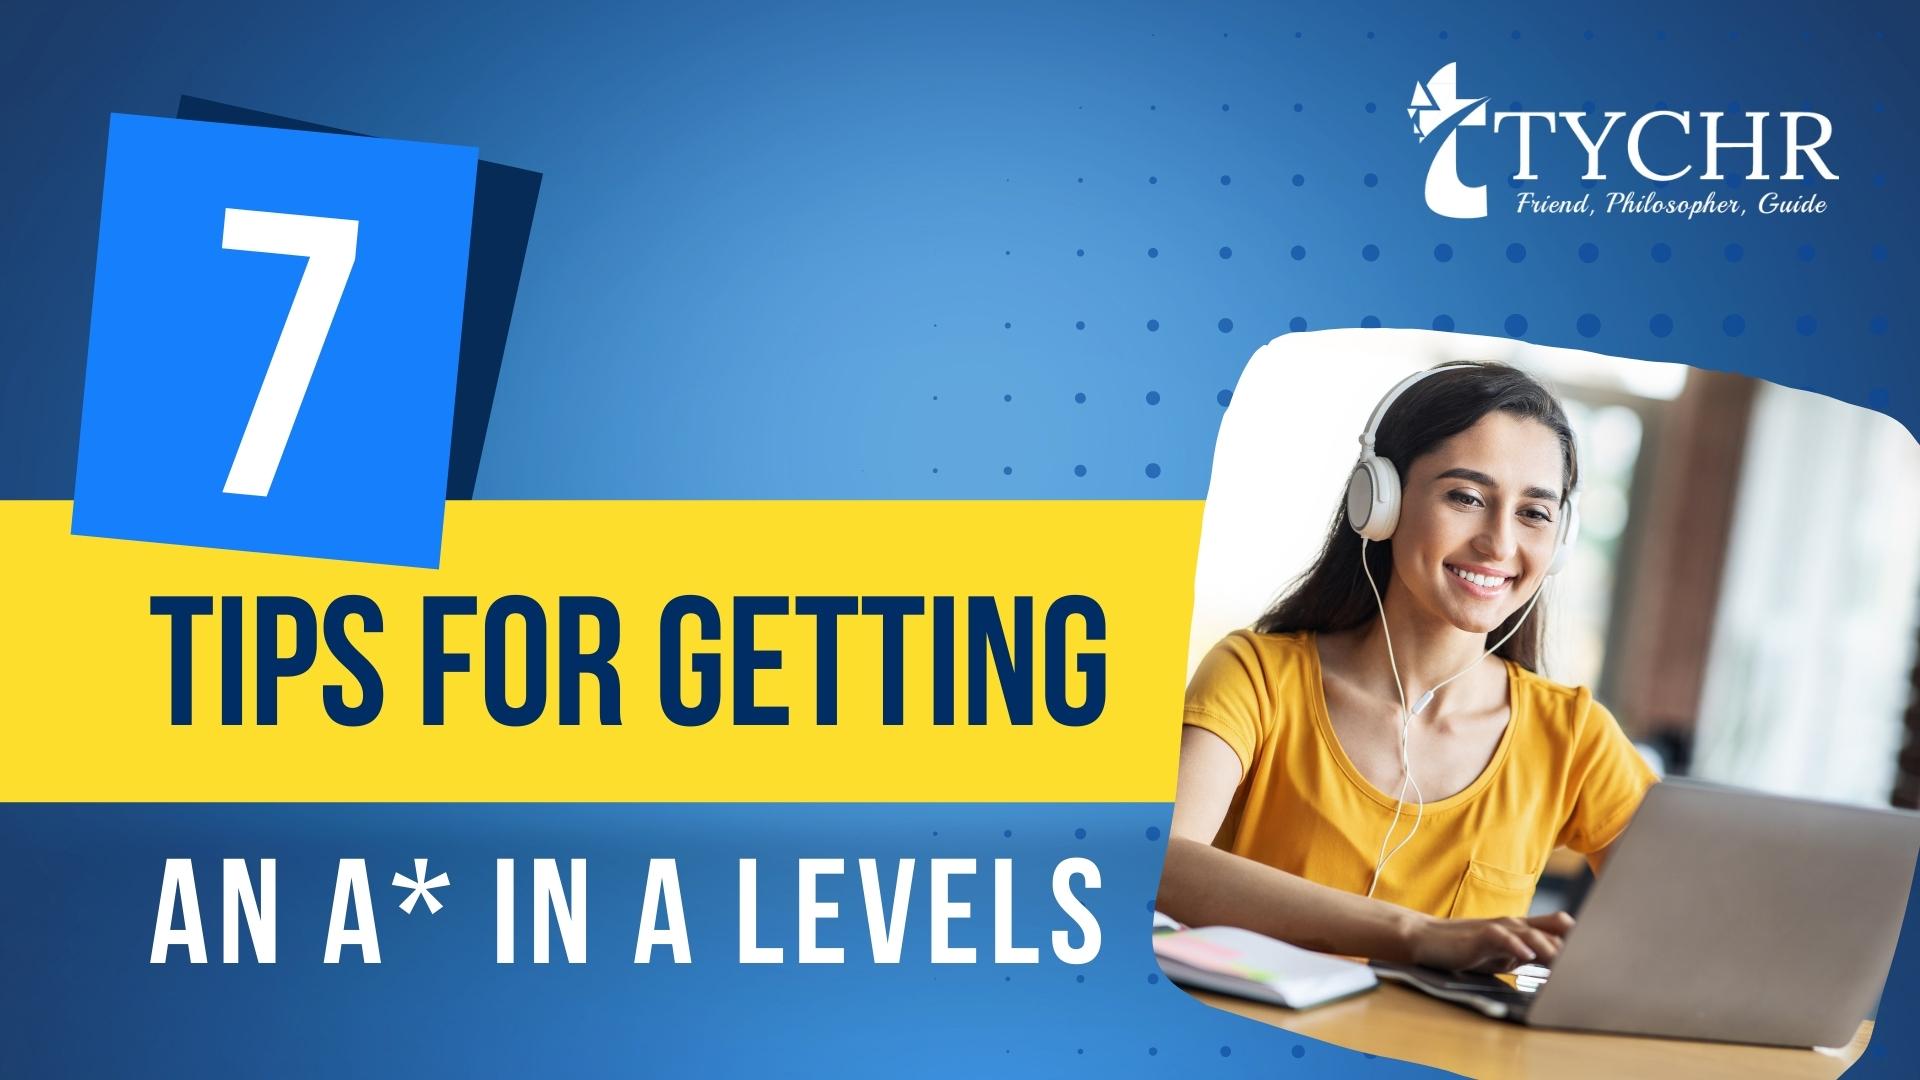 7 Tips for Getting an A* in A Levels